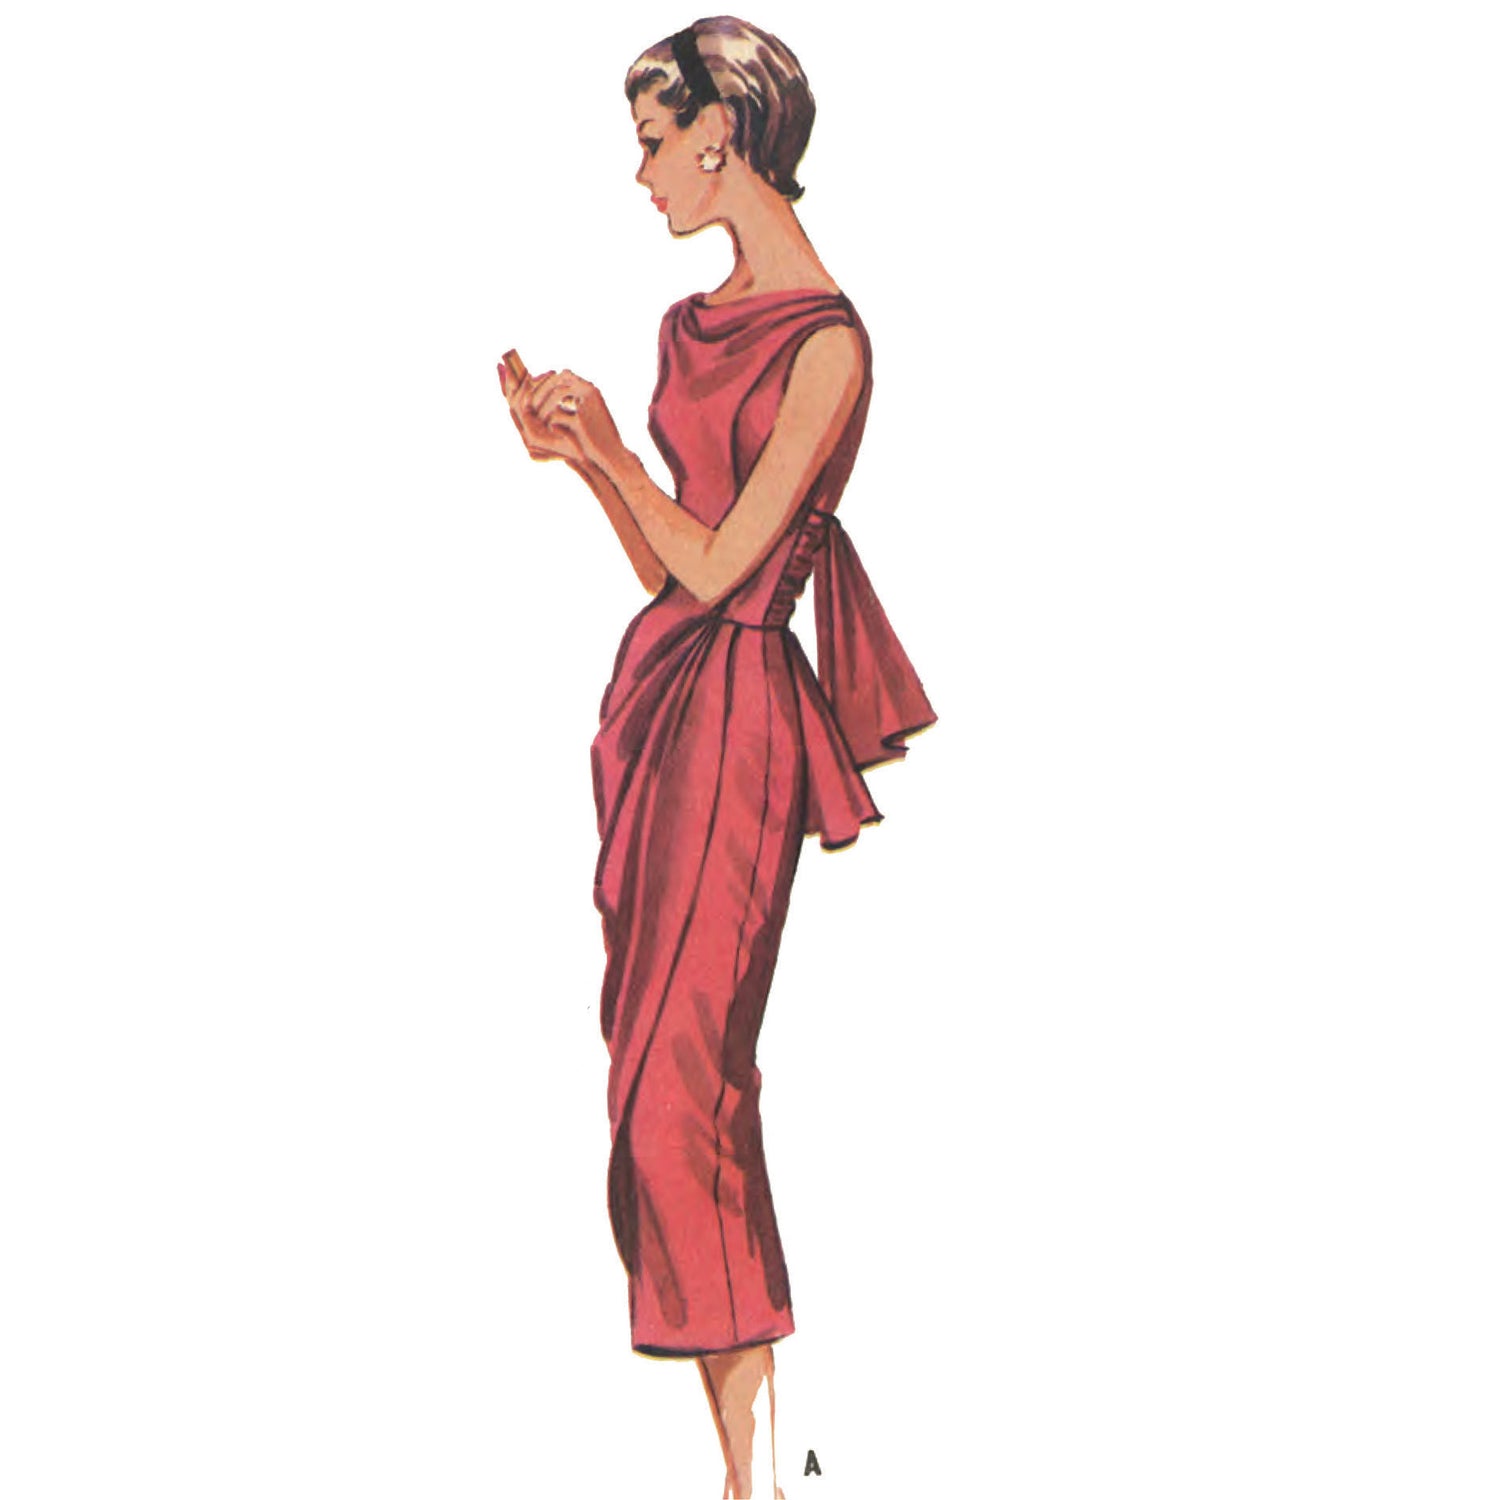 Woman wearing fitted and draped red dress with sash